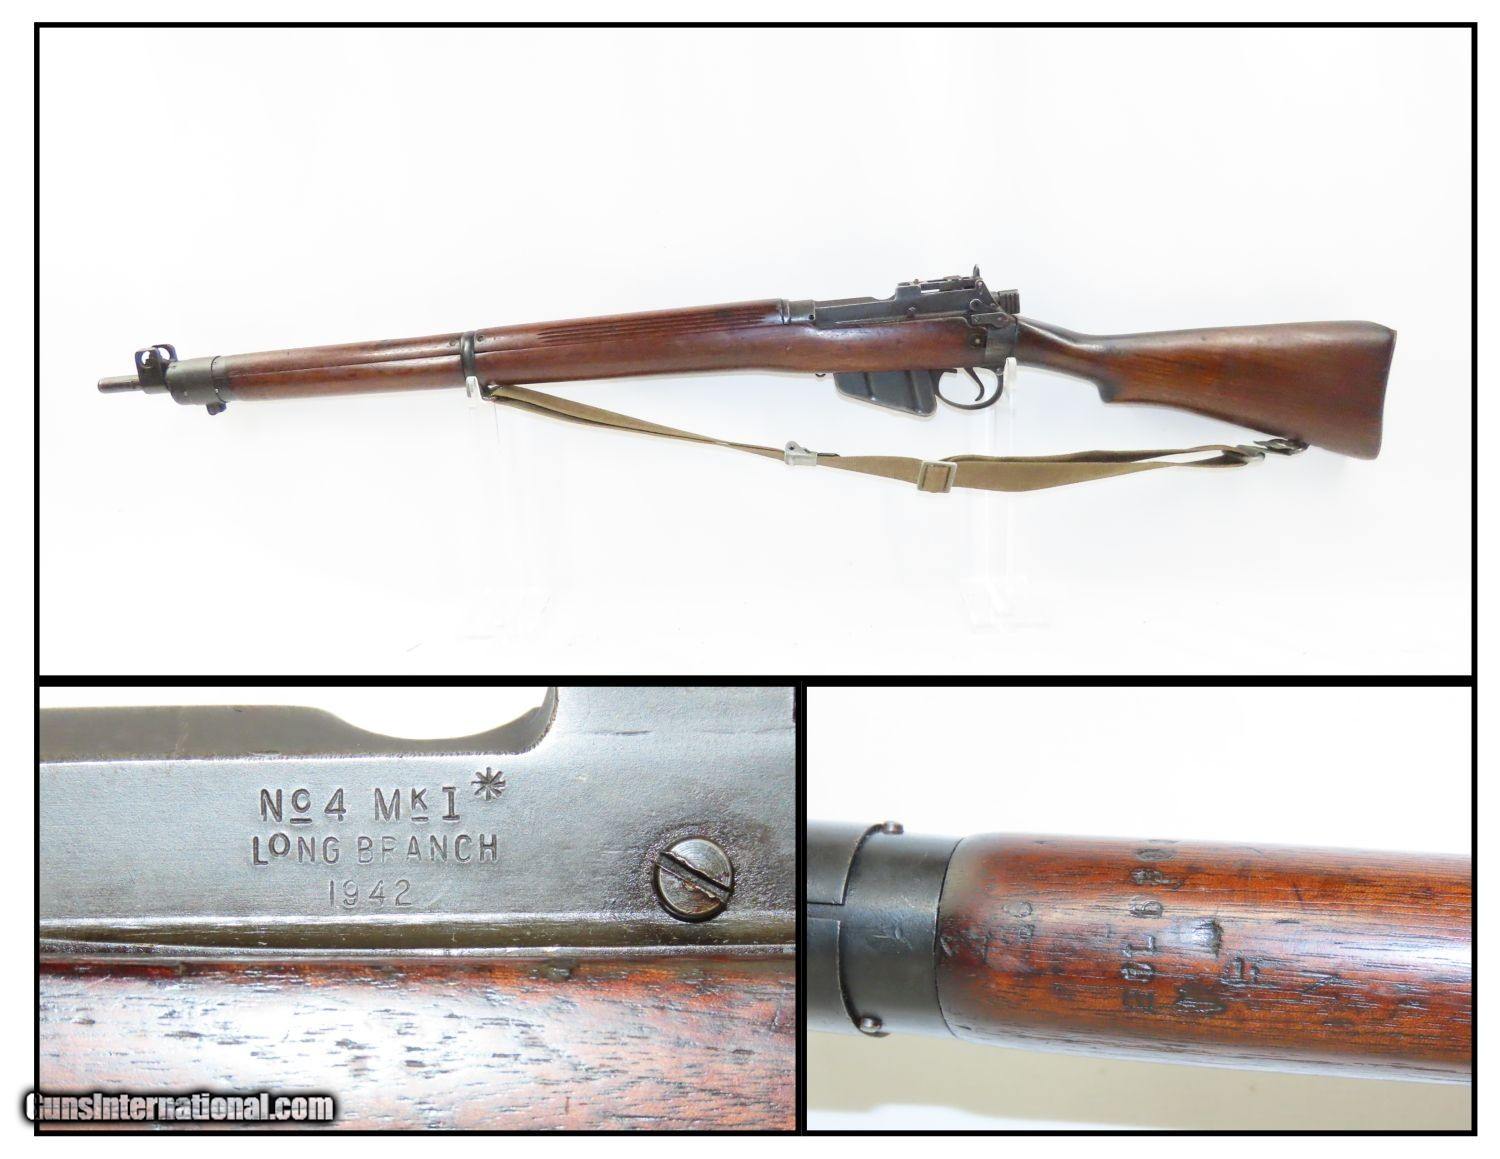 1942 Date WORLD WAR II Era LONG BRANCH Enfield No. 4 Mk1 C&R MILITARY Rifle  Primary INFANTRY Weapon of ENGLAND & CANADA